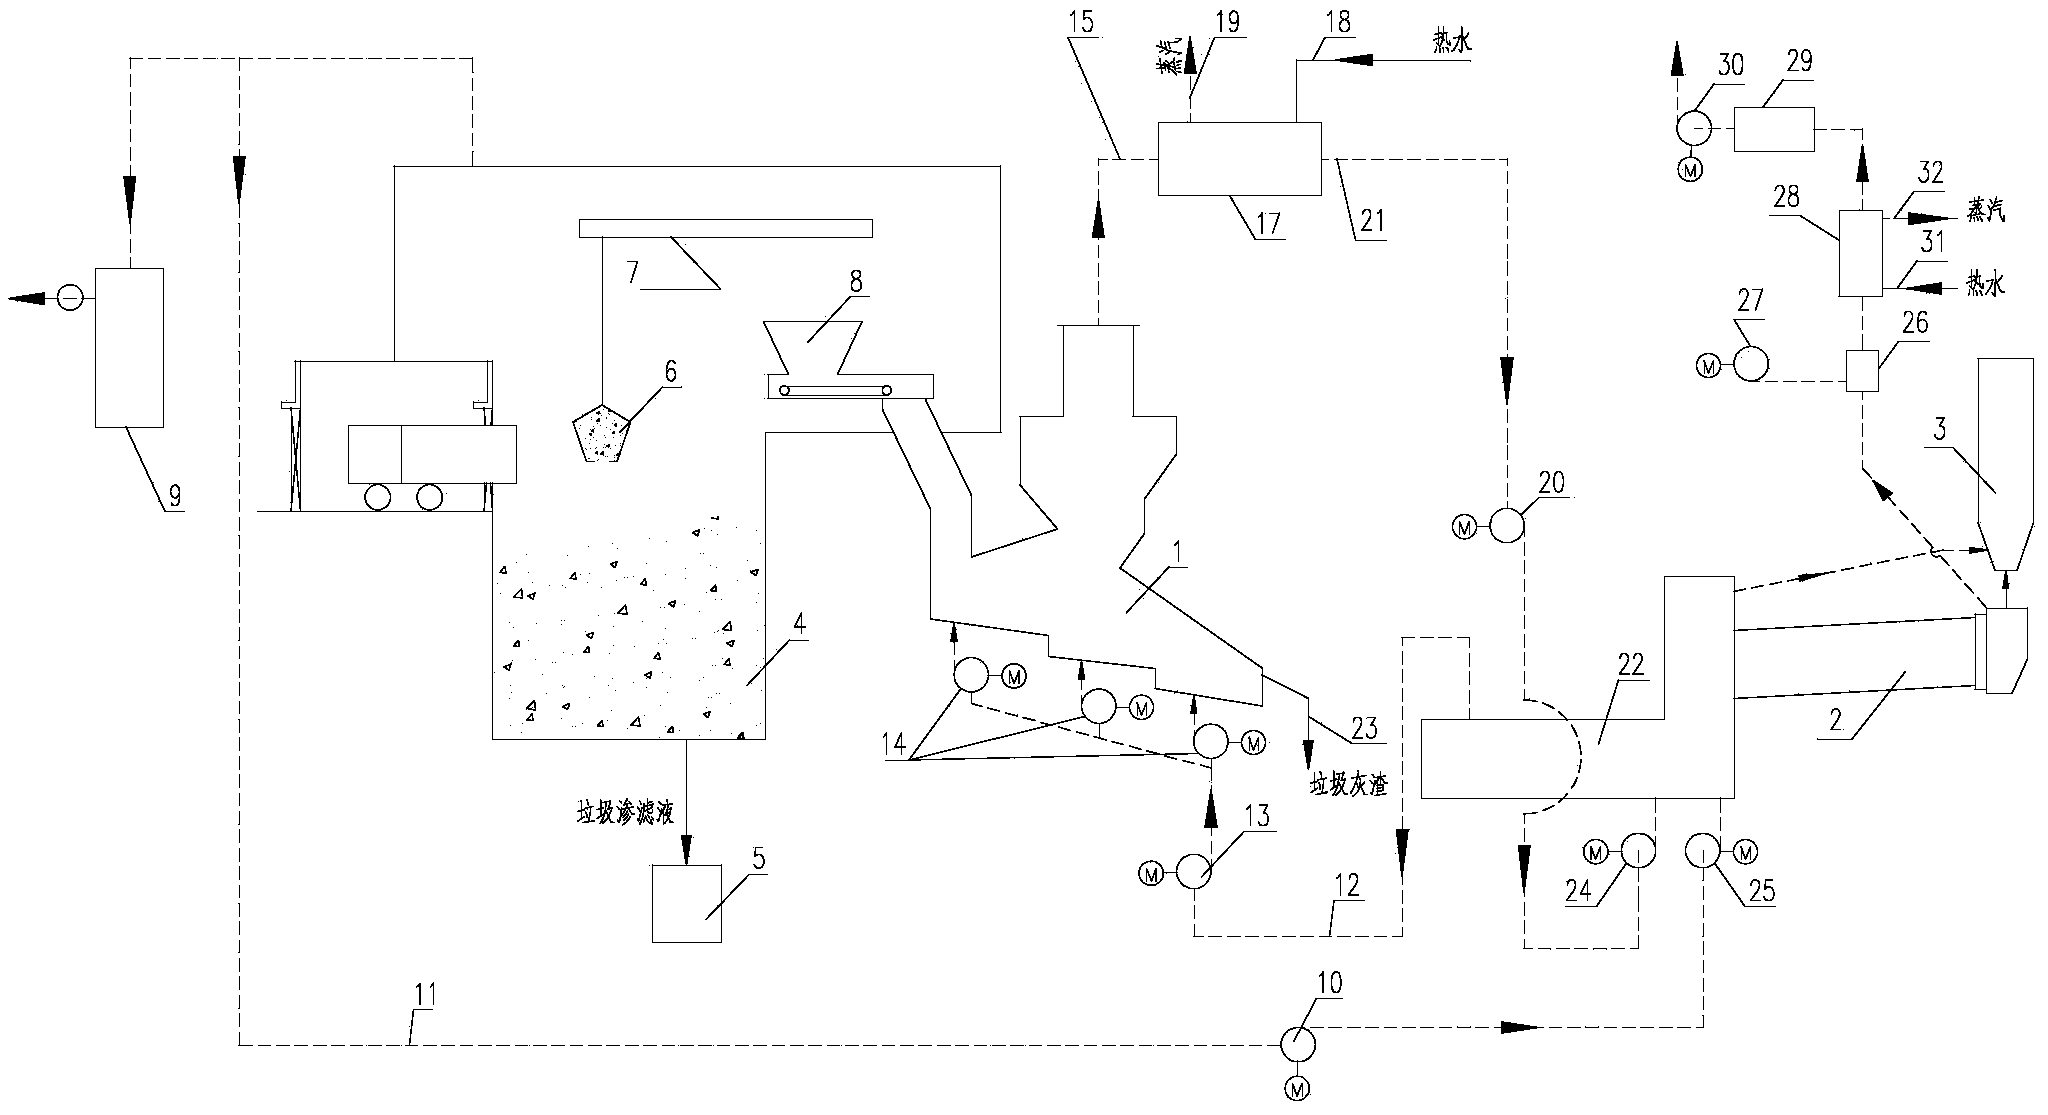 System for synergistically treating household garbage through cement kiln